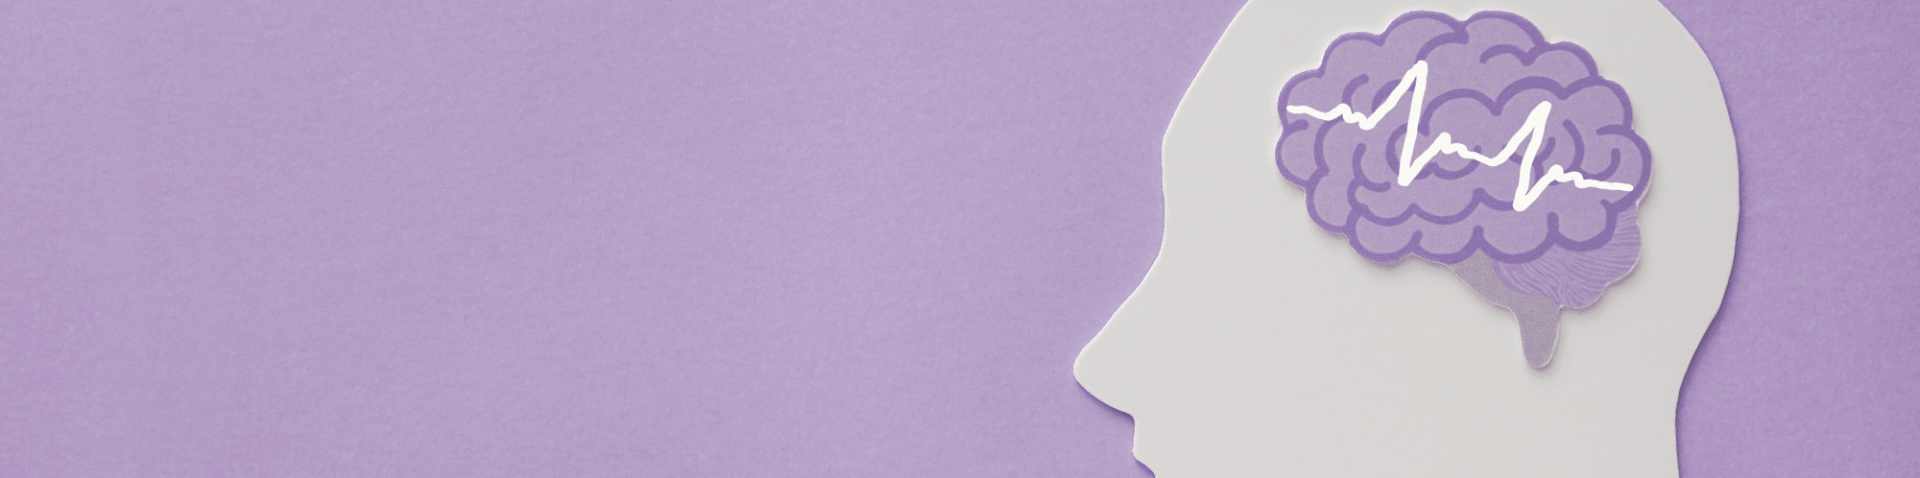 encephalography-brain-paper-cutout-on-purple-background-epilepsy-and-alzheimer-awareness-seizure-disorder-mental-health-concept-min.png